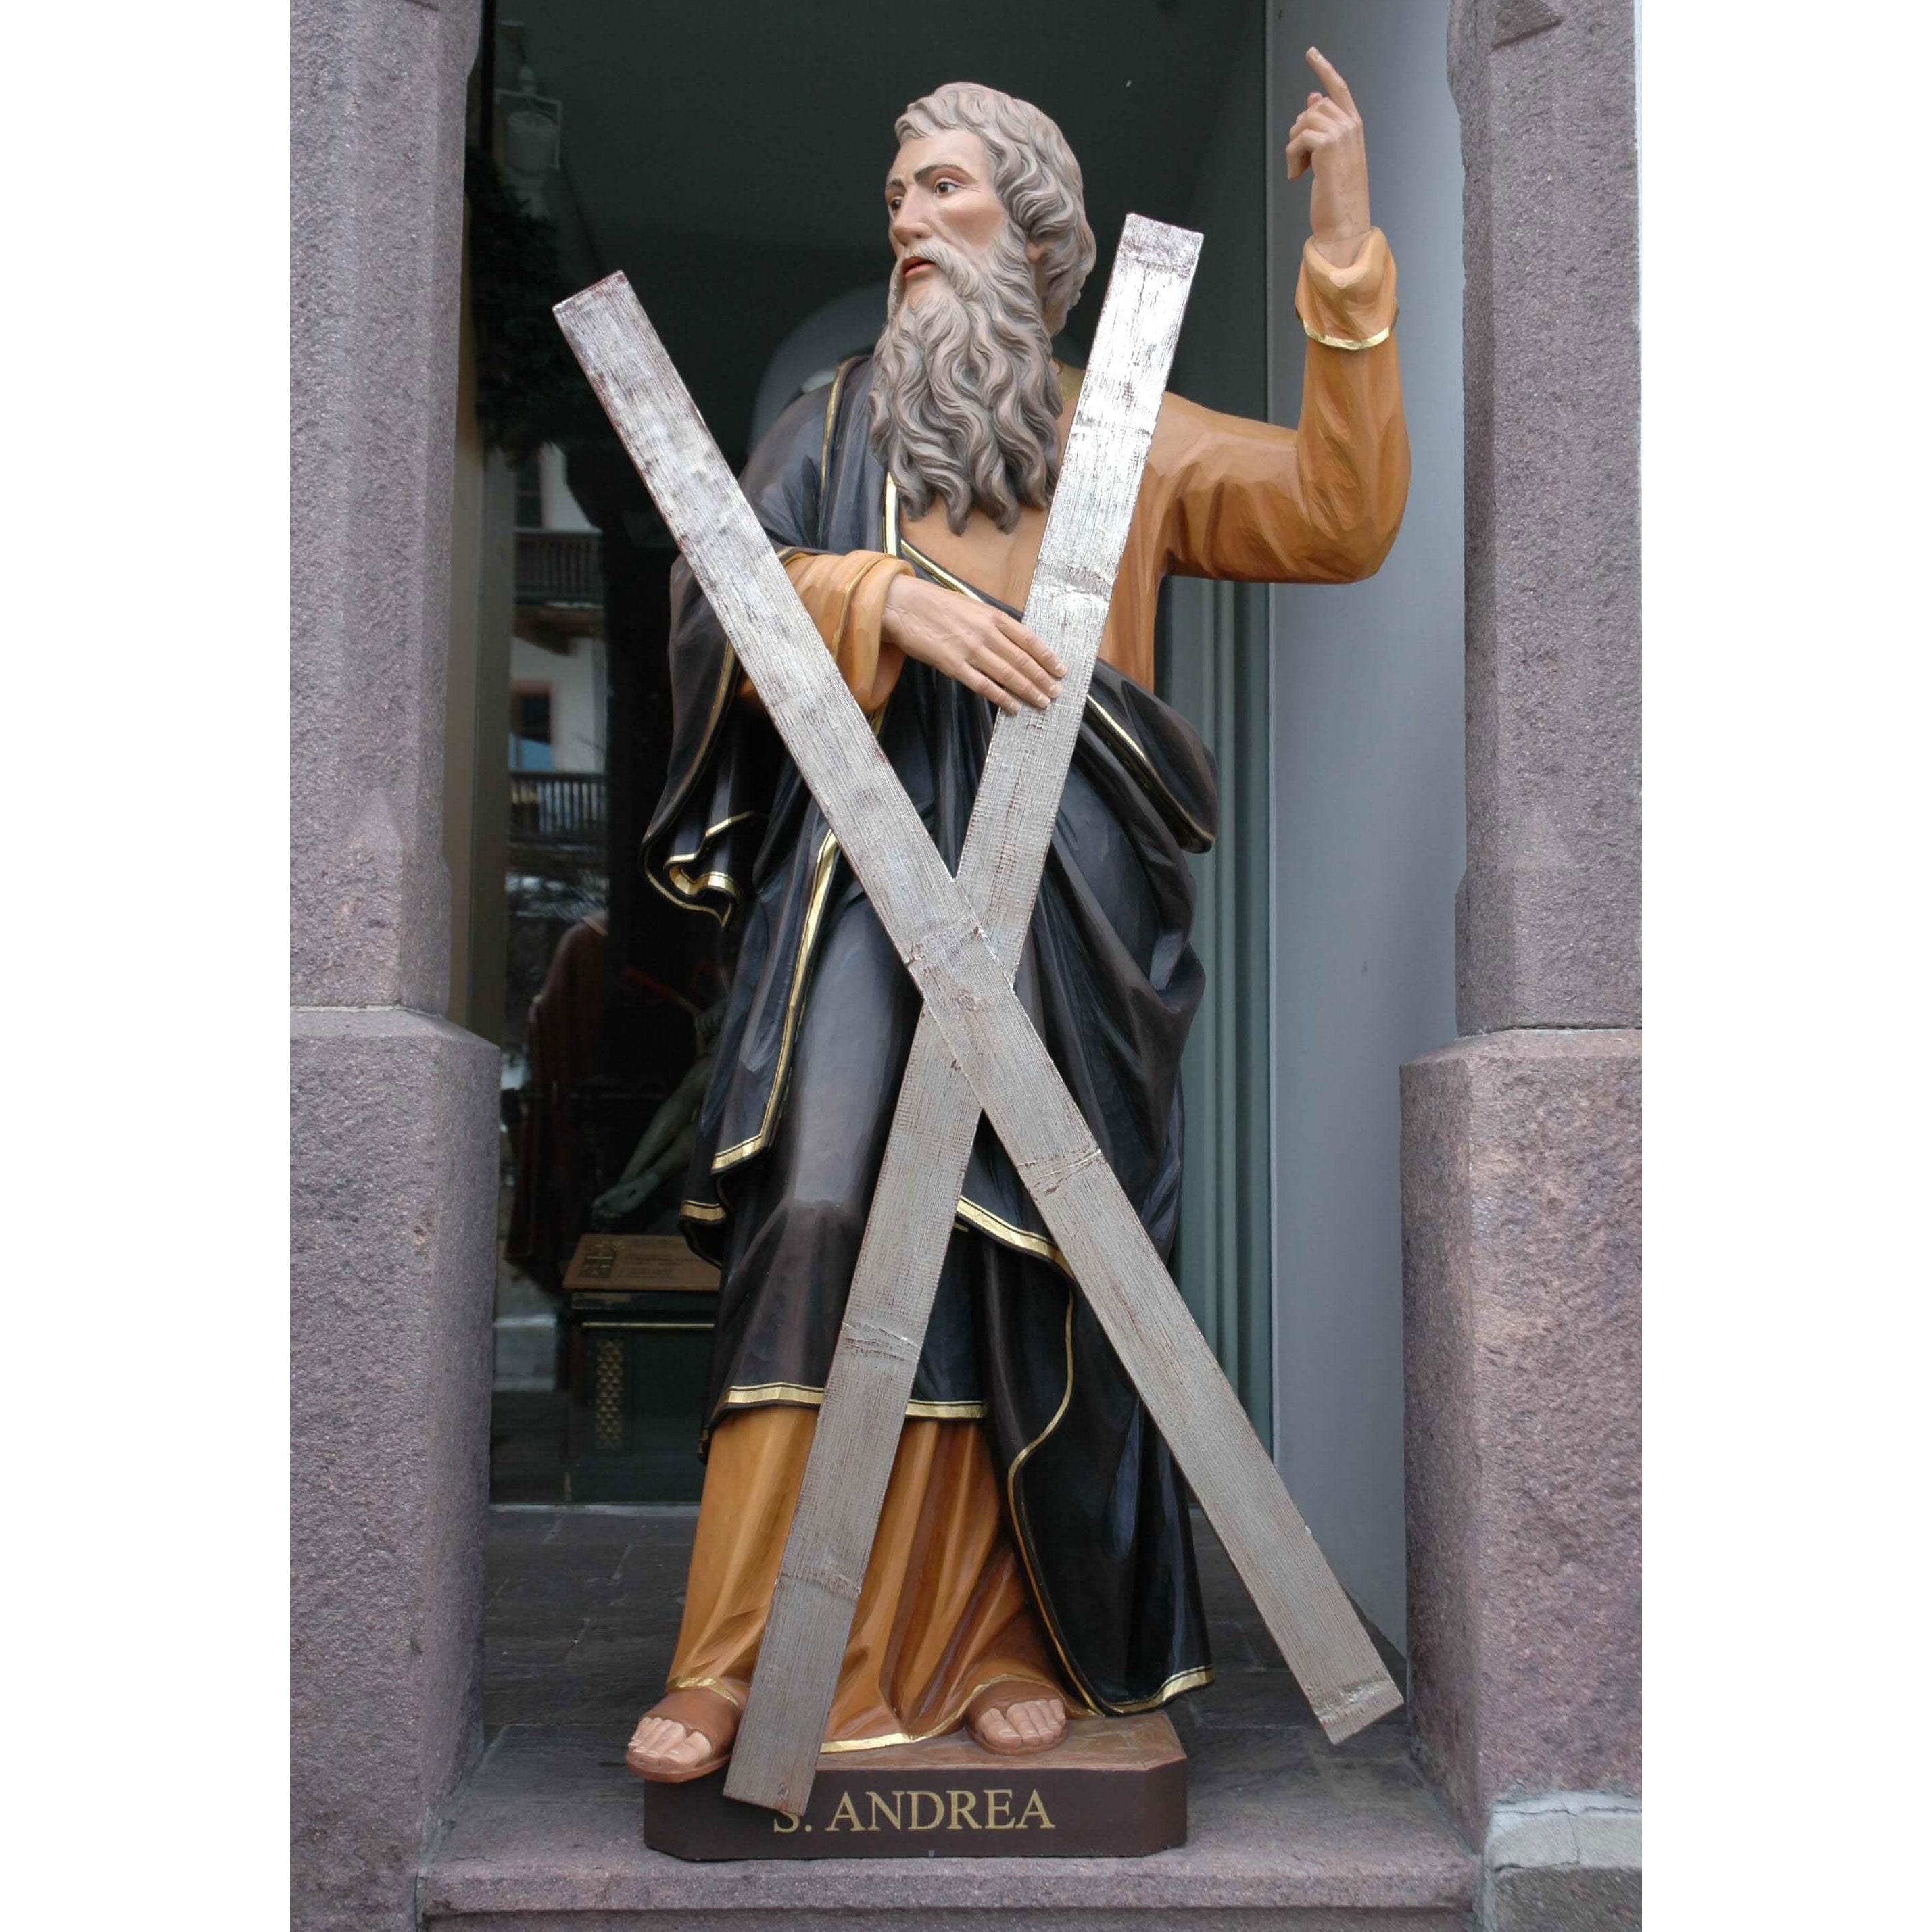 St Andrew the Apostle | Wood Carved Statue